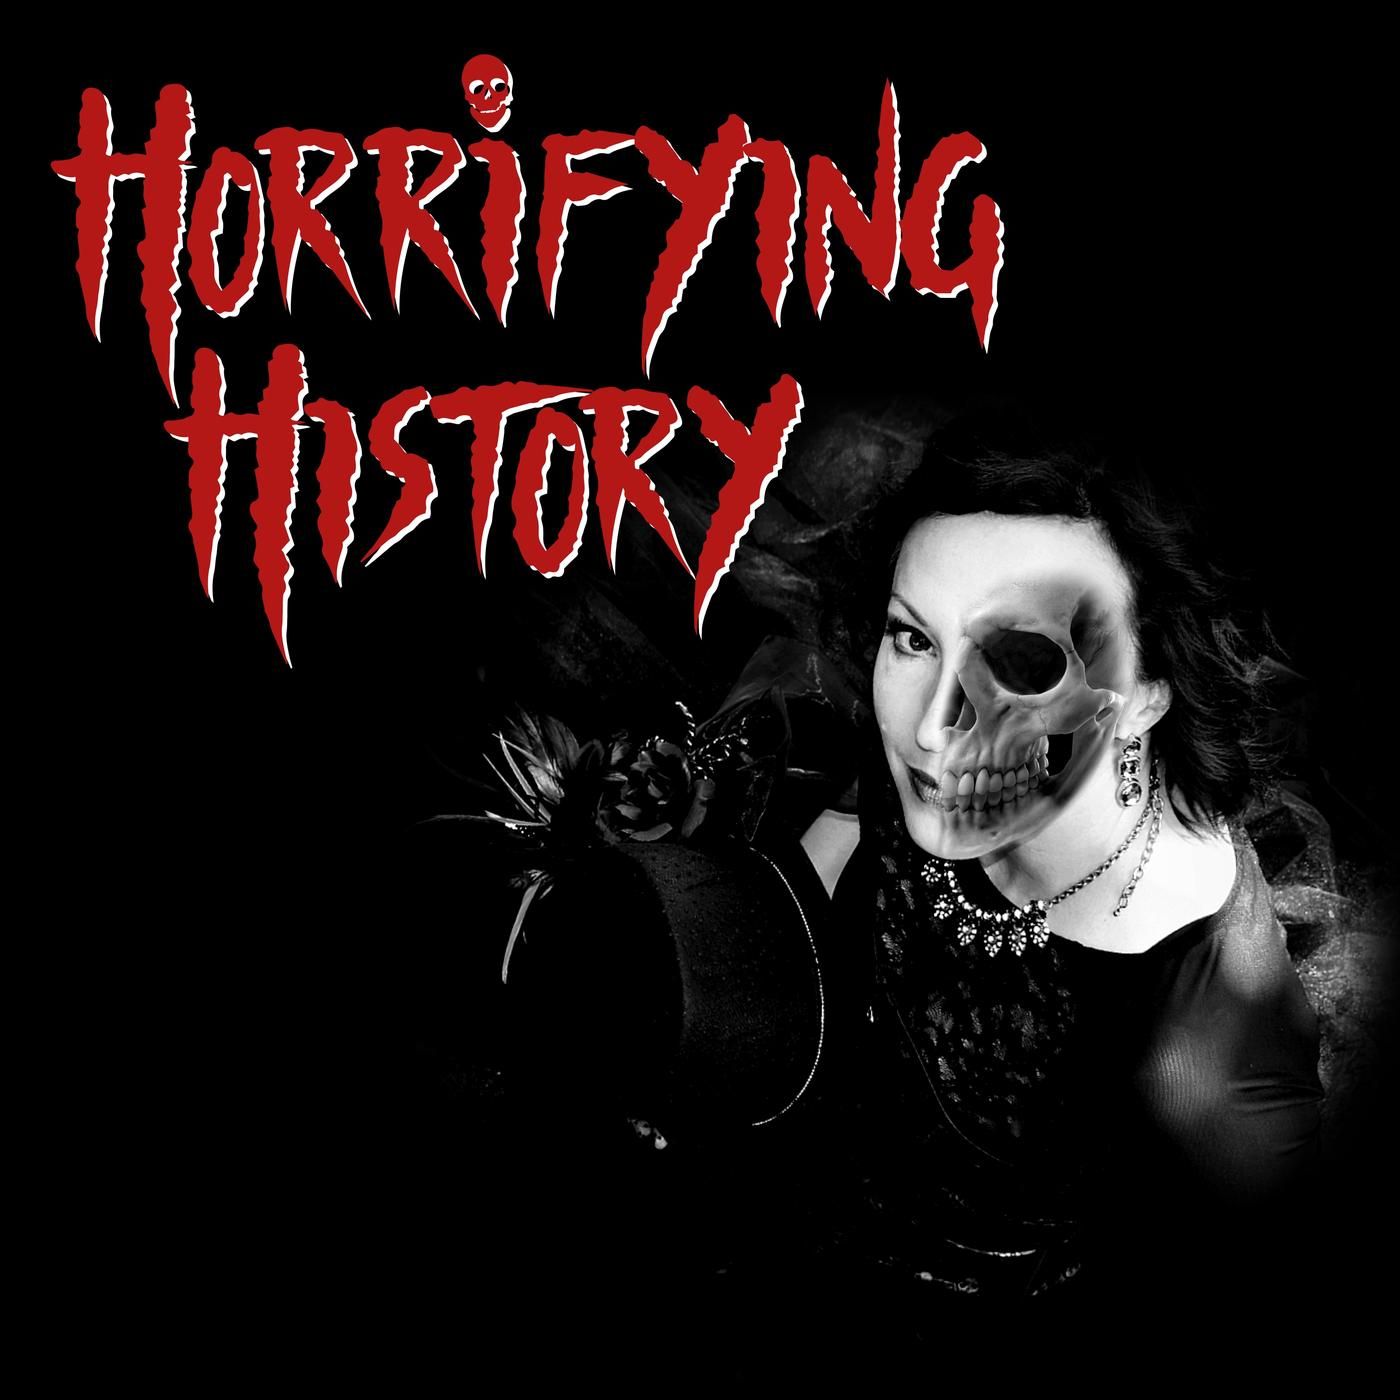 The Last of the Vampires by Horrifying History